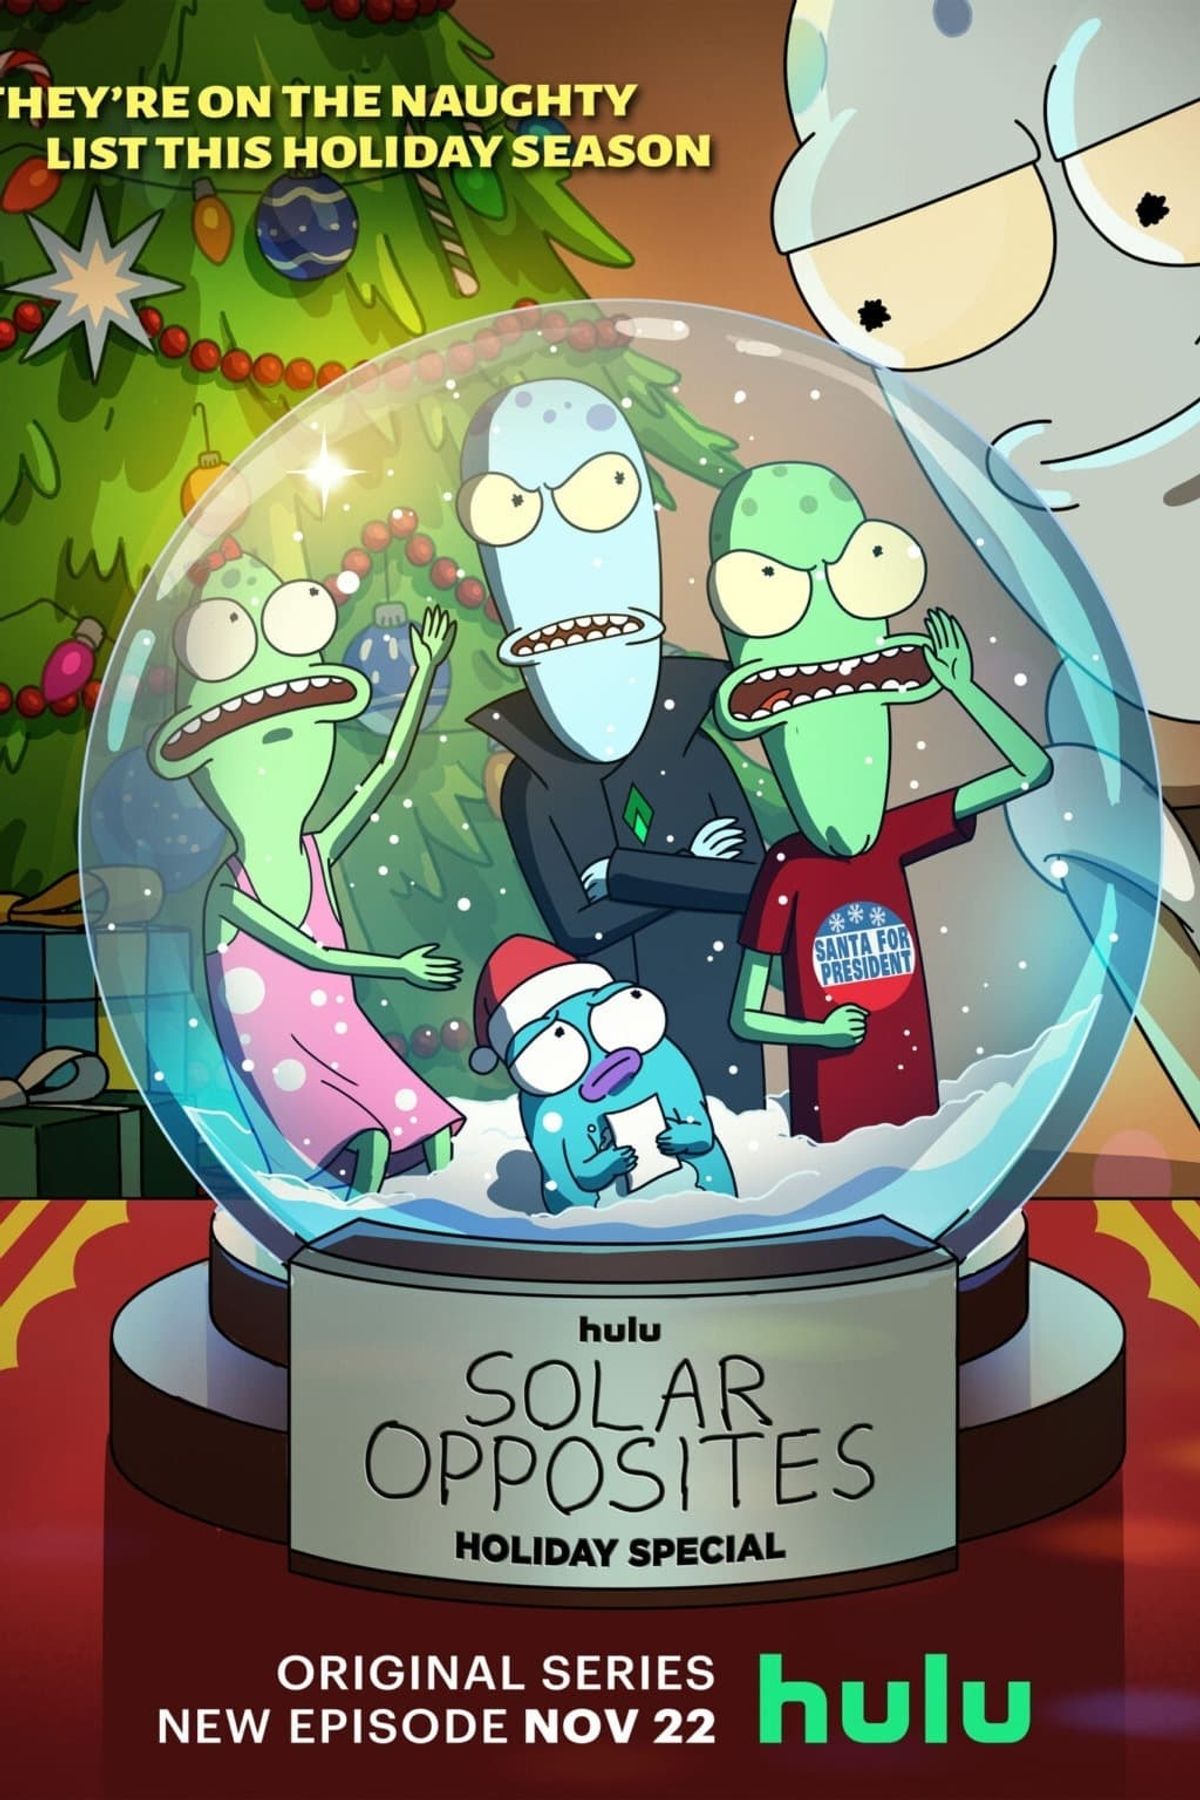 Where can I watch “A Very Solar Holiday Opposites Special”